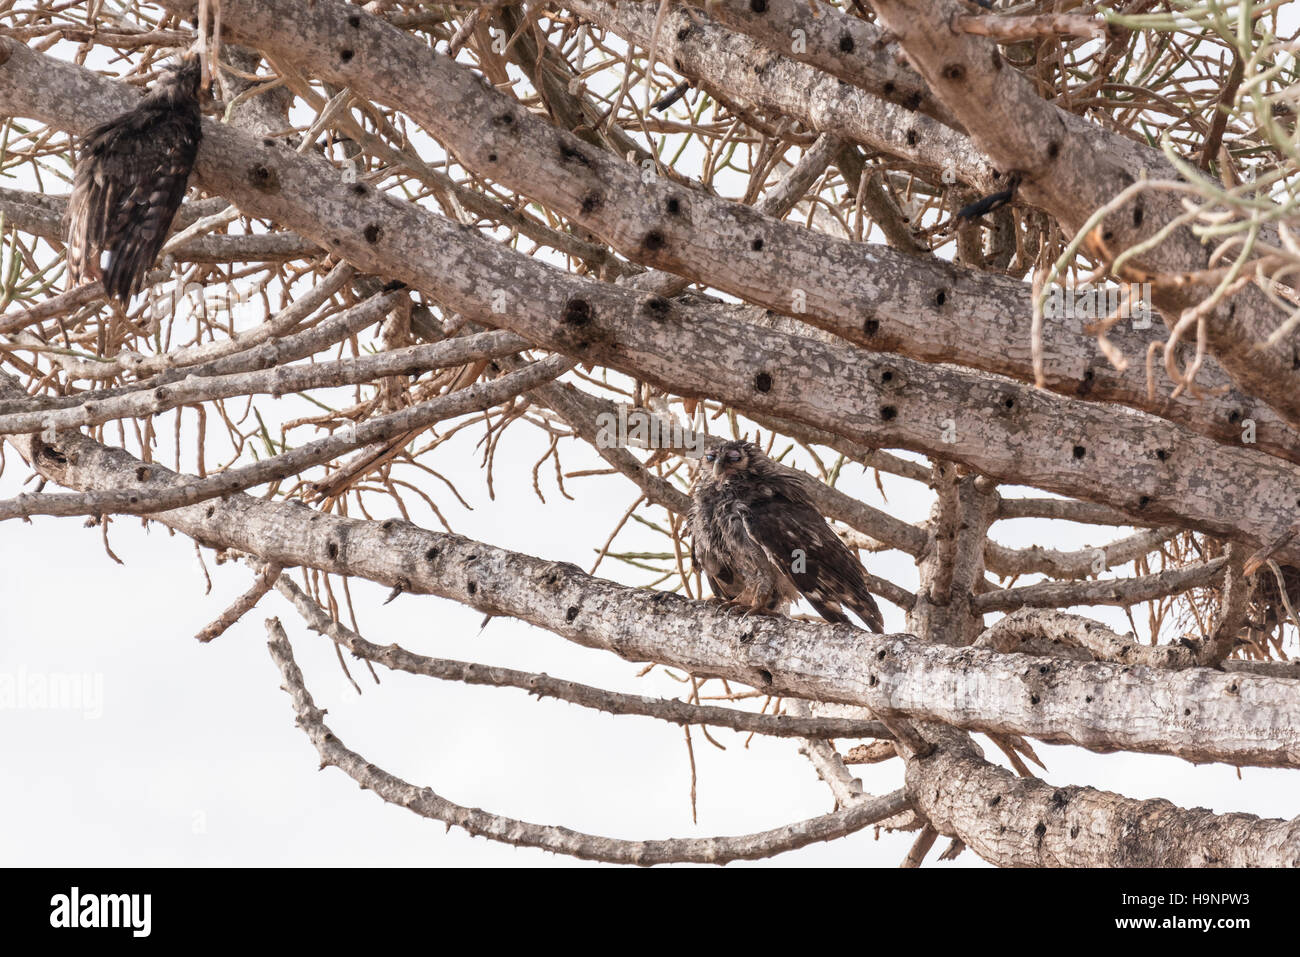 Two bedraggled Verreaux's Eagle Owls perched in a tree after a period of heavy rain Stock Photo